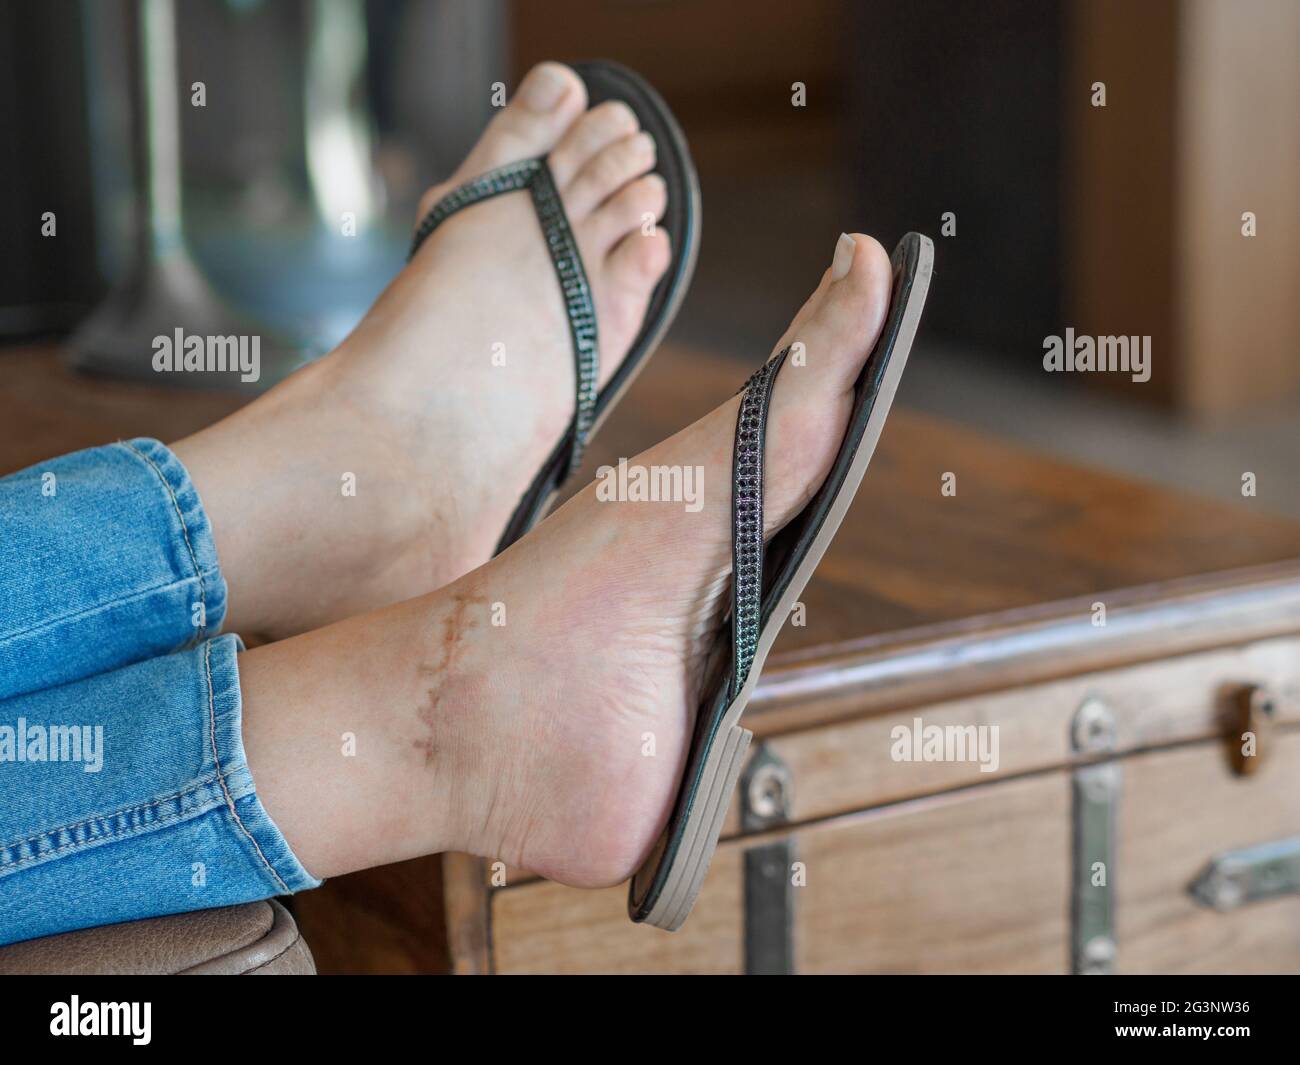 Legs of caucasian woman in flip flops who suffers from broken ankle. Scar on left foot after surgery.  Stock Photo